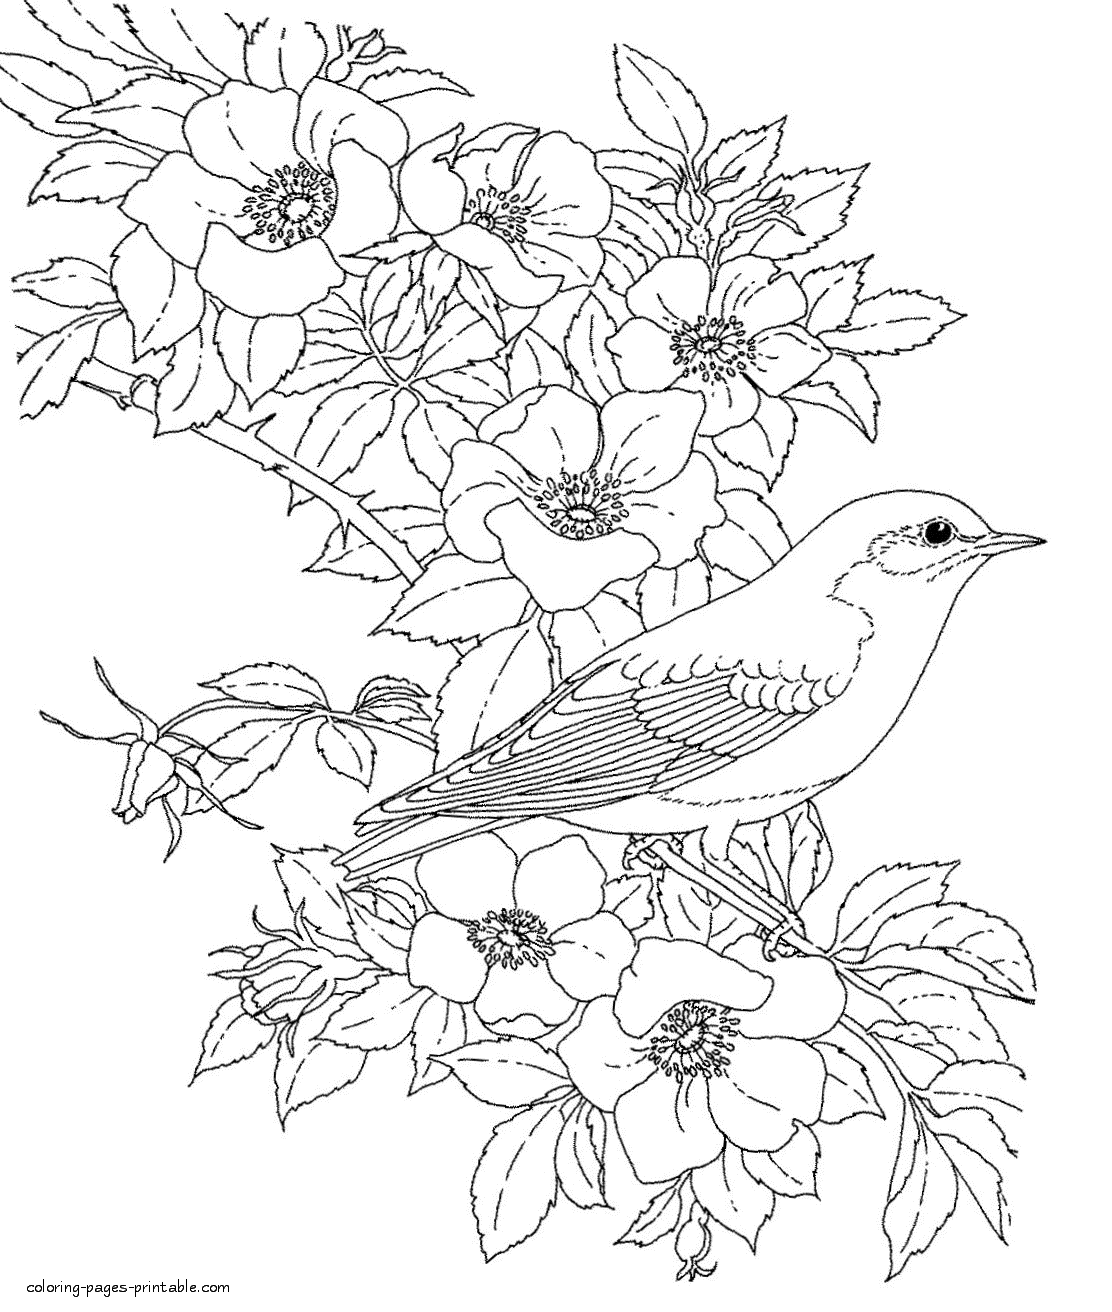 coloring-pages-for-adults-bird-and-flowers-coloring-pages-printable-com